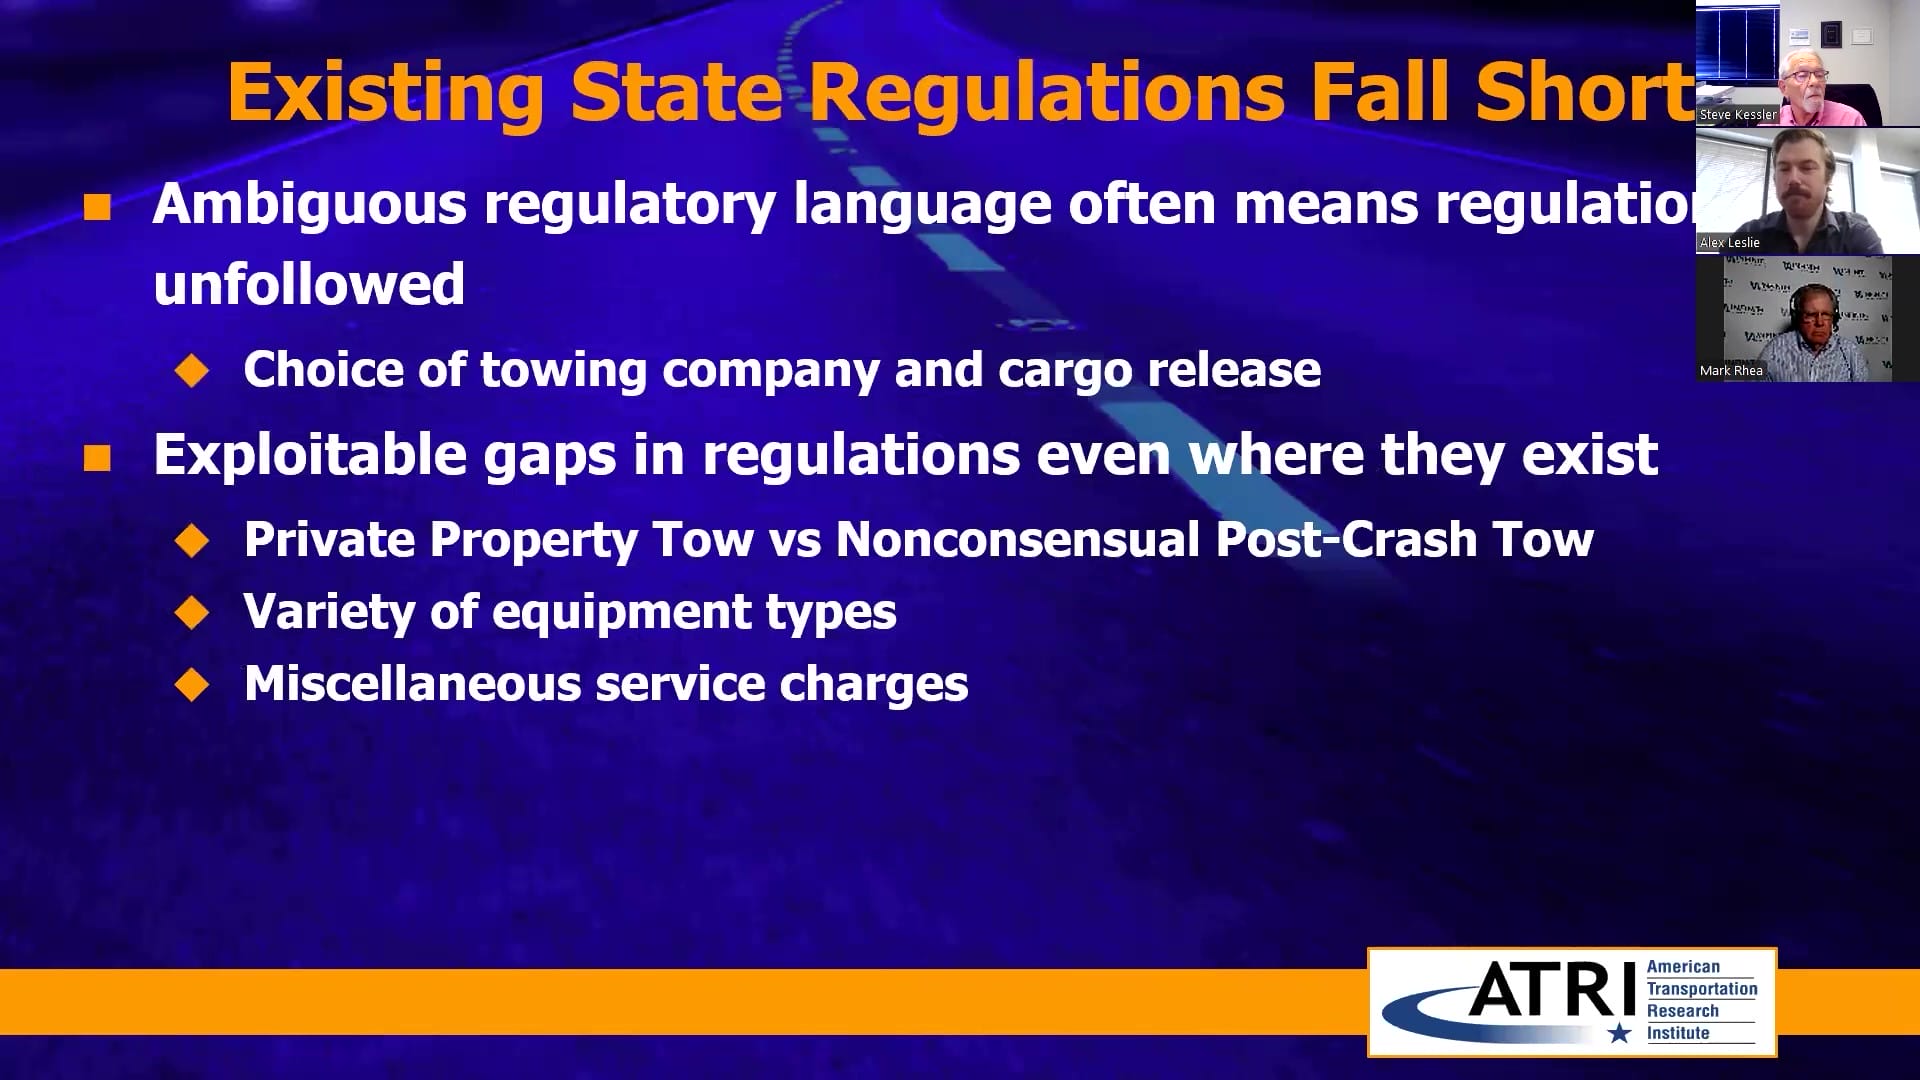 ATRI’s Research on Predatory Towing Existing State Regulations Fall Short